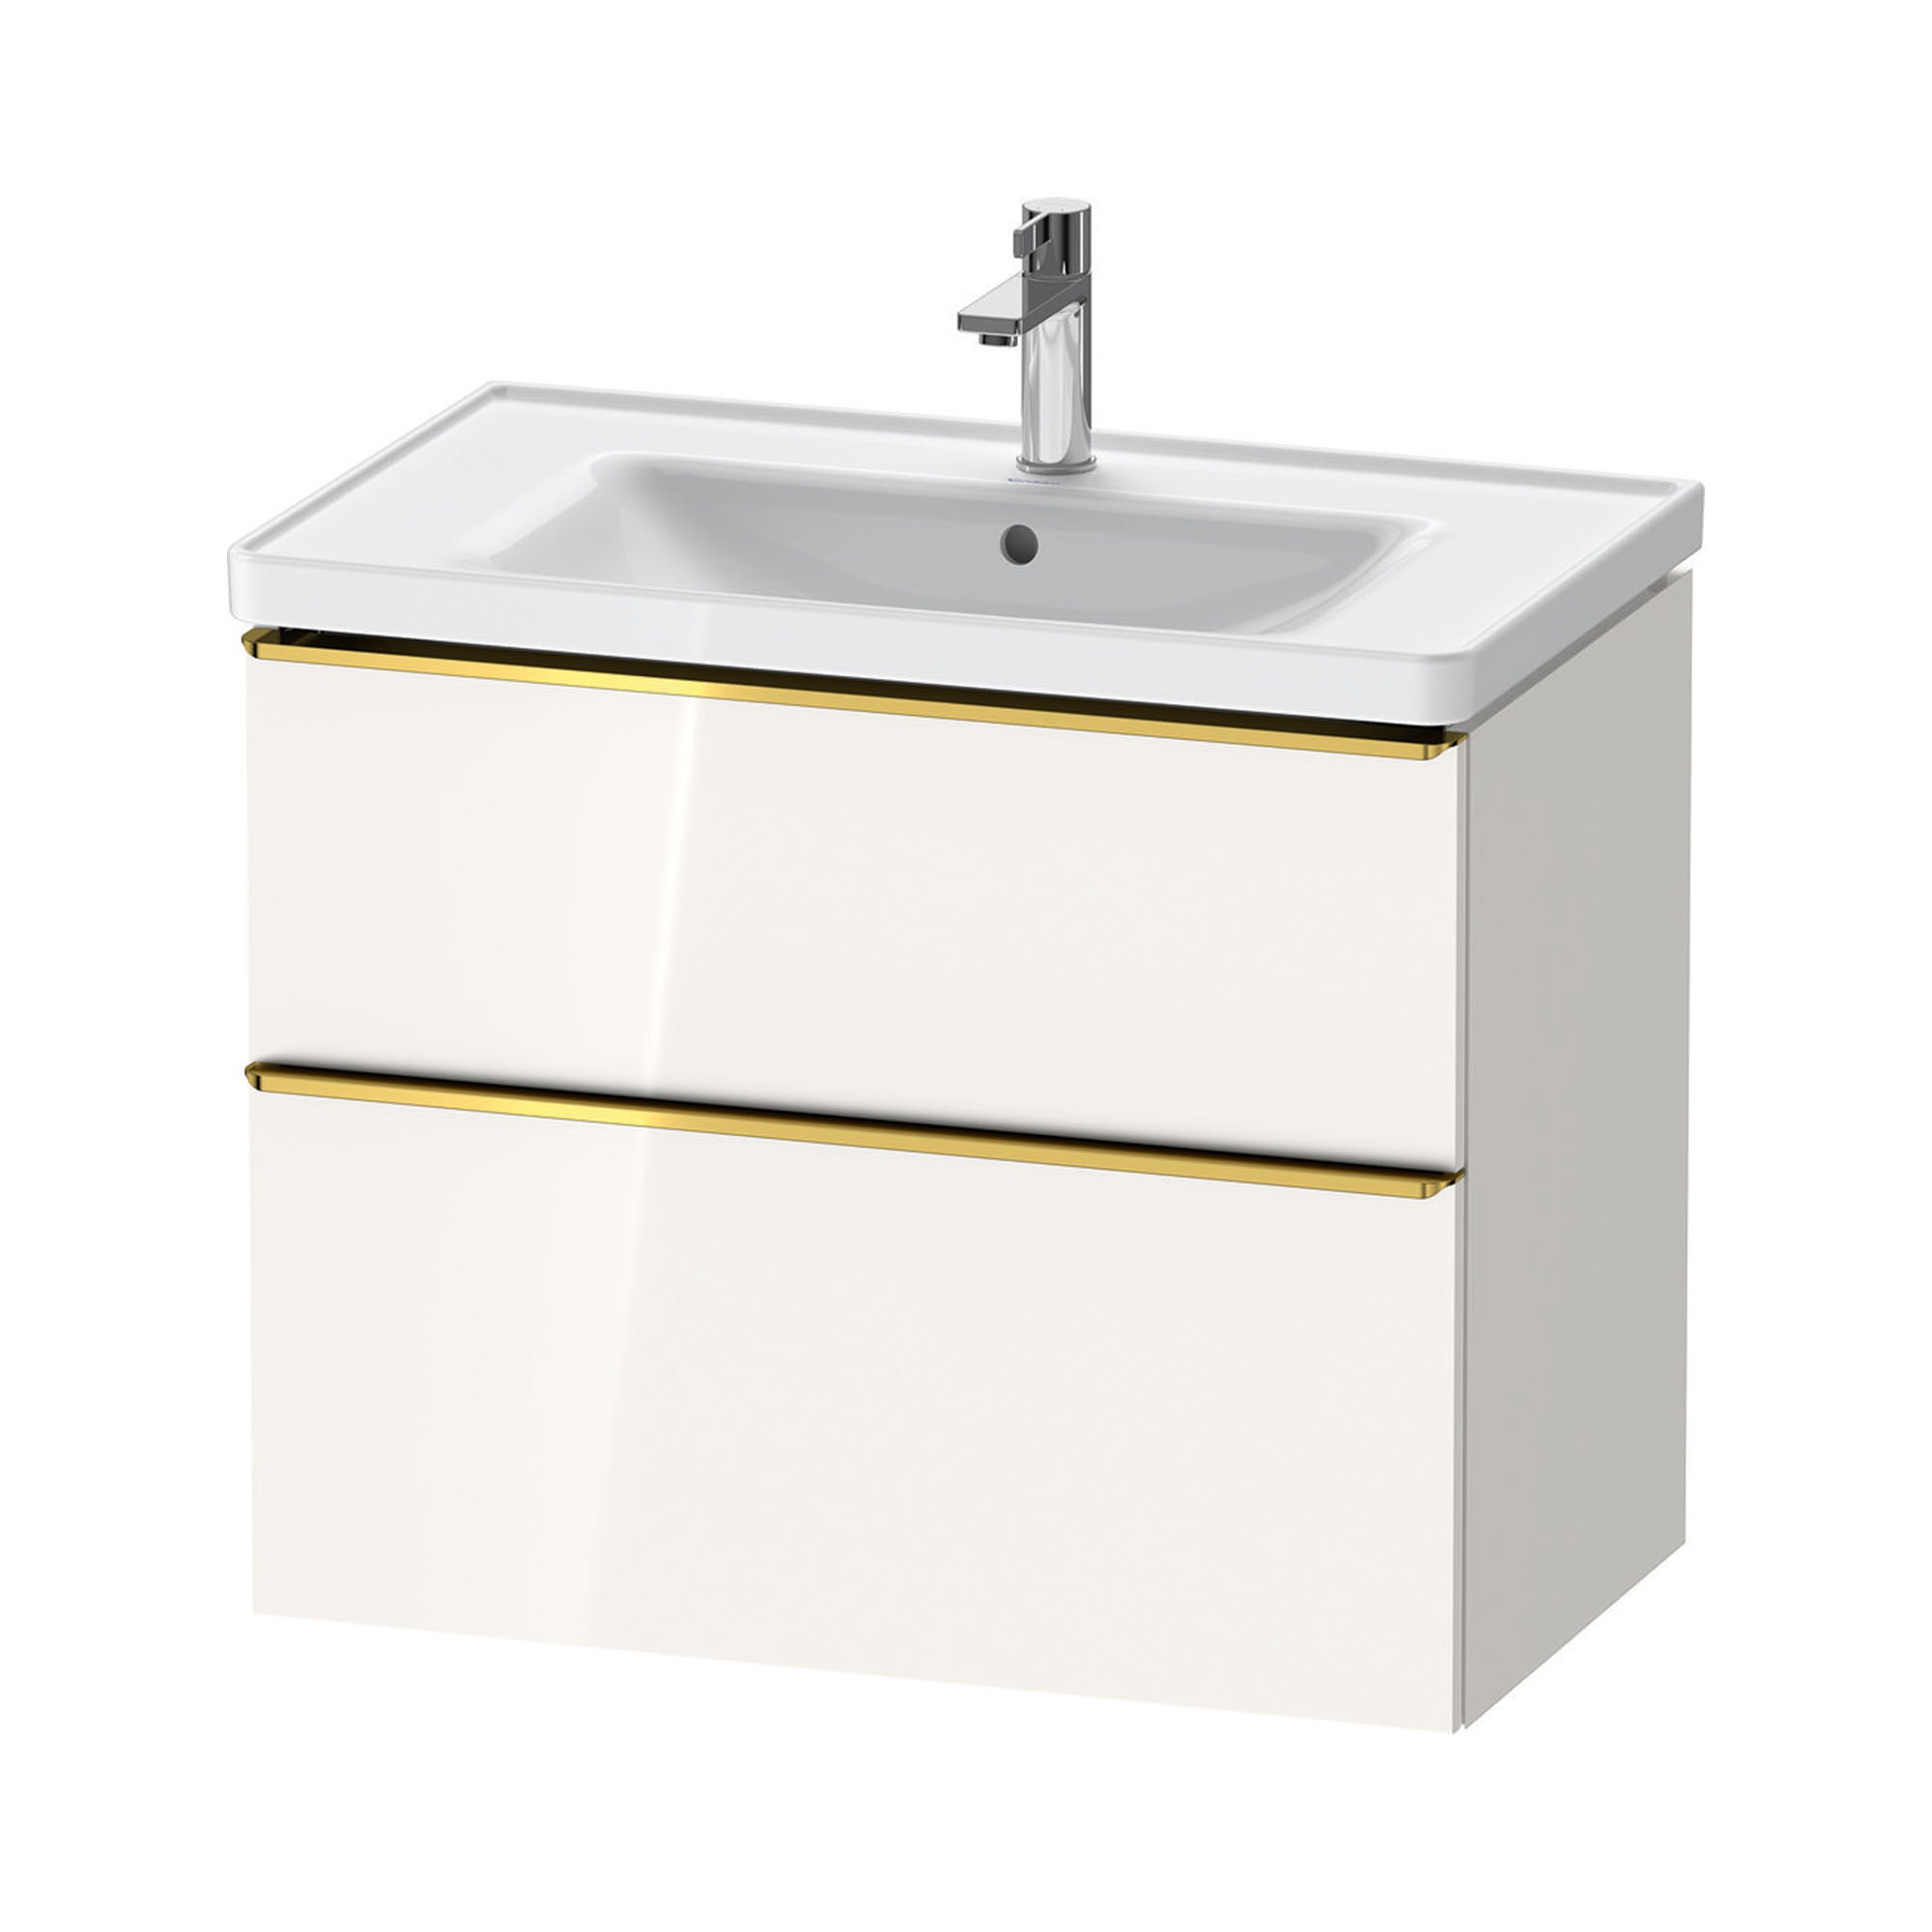 duravit d-neo 800mm wall mounted vanity unit with d-neo basin gloss white gold handles